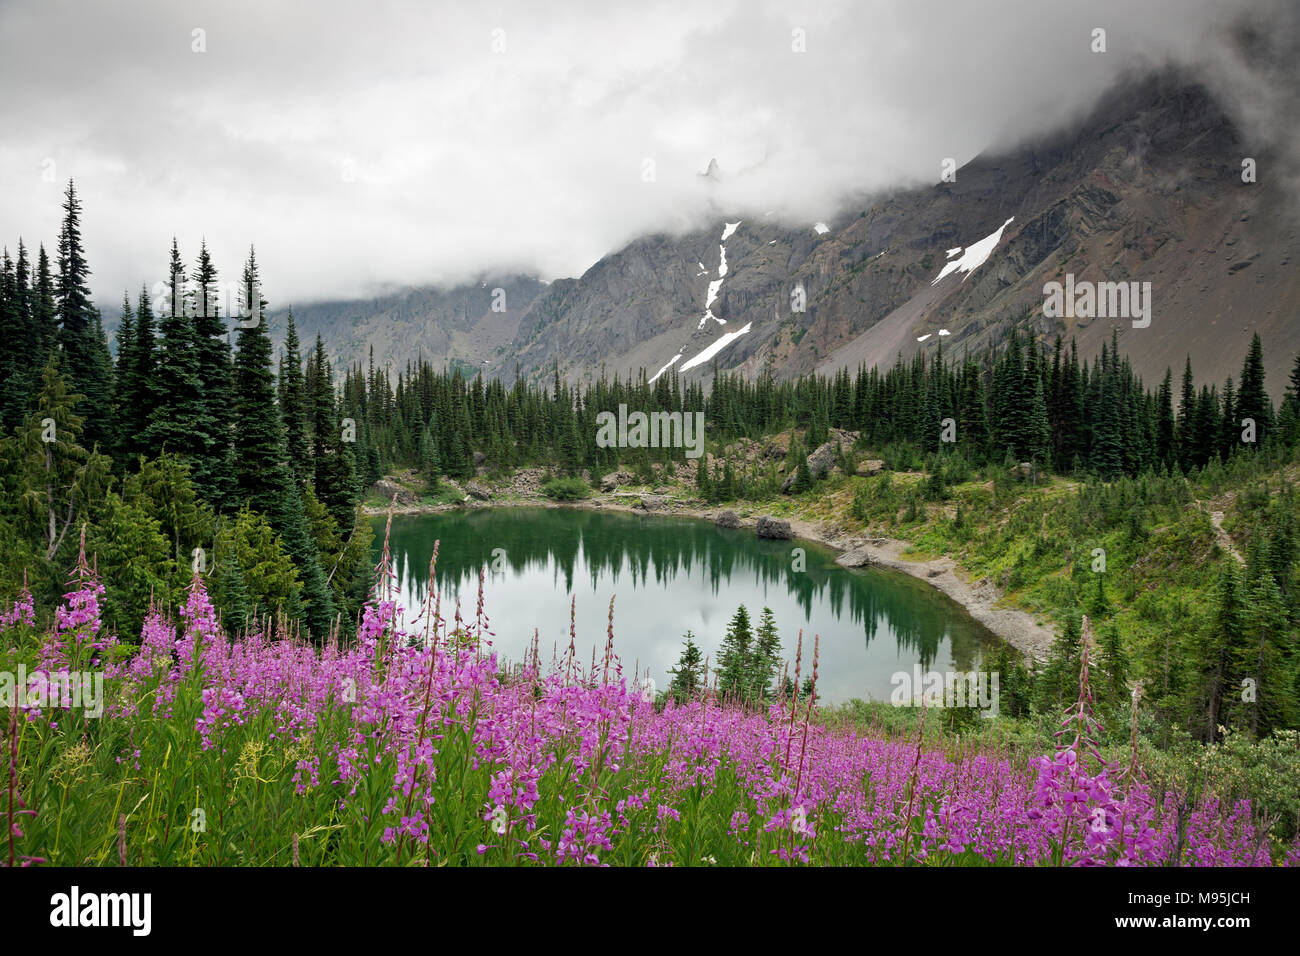 WA13895-00...WASHINGTON - Hill covered with colorful fireweed above Home Lake in the Dungeness River Valley area of Olympic National Park. Stock Photo